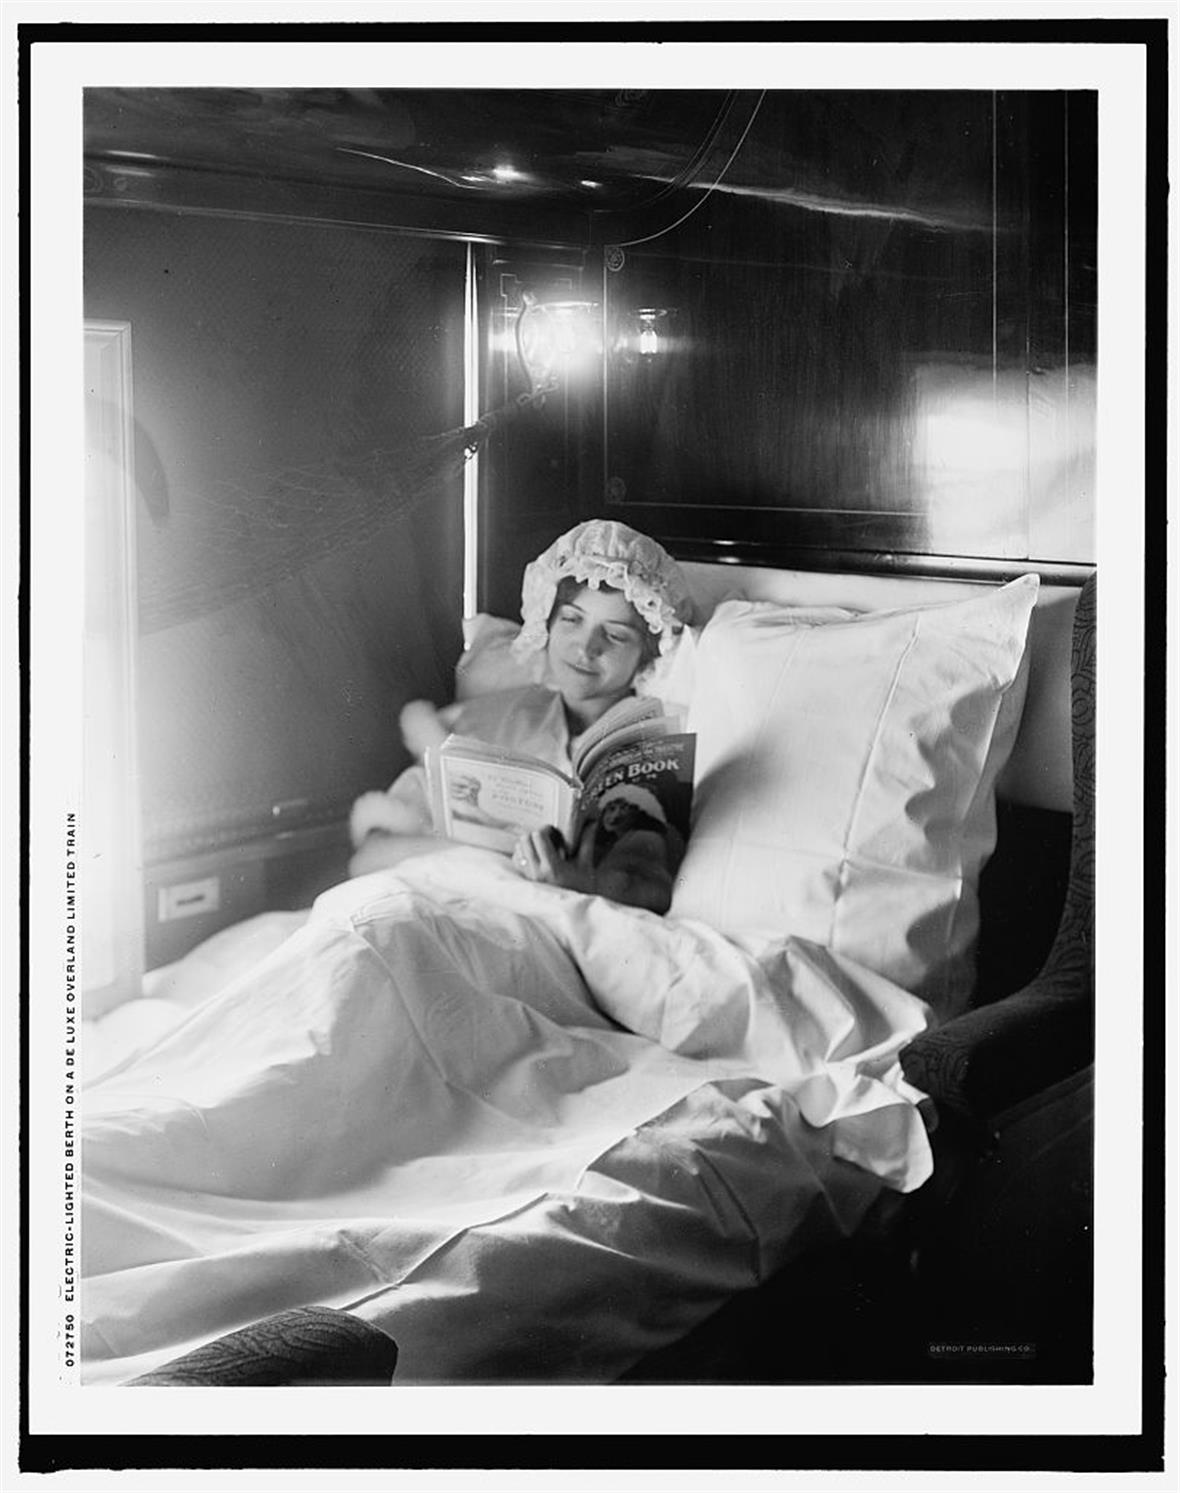 a black and white photograph of a woman reading a book in a bed on a train. There is a light behind her, illuminating the room.